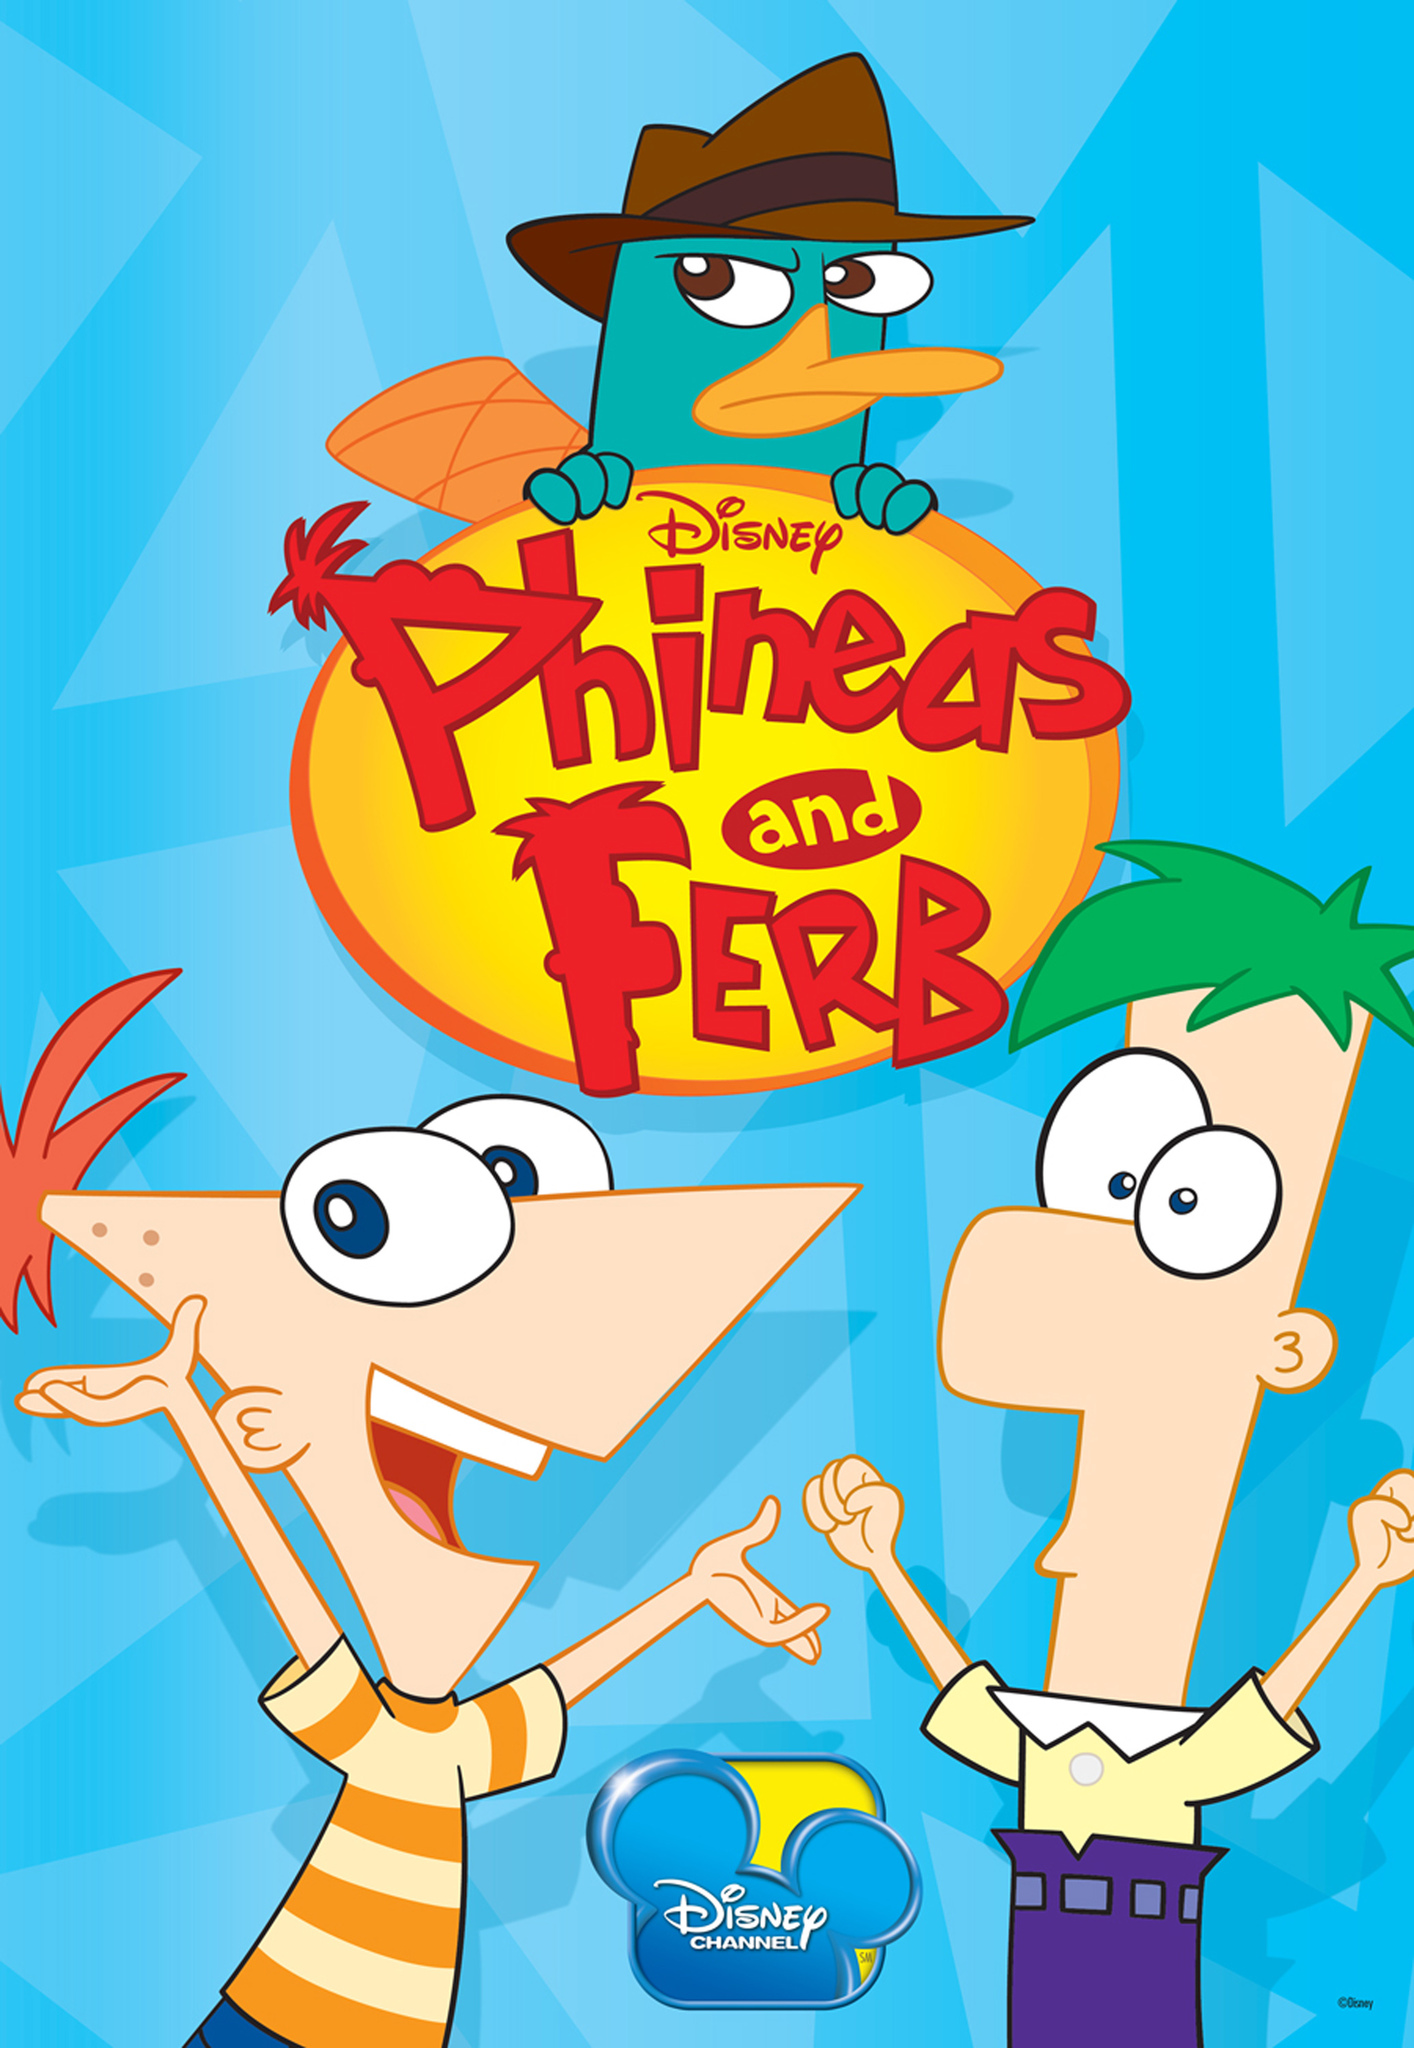 Phineas And Ferb 2nd Dimension - Phineas and Ferb | Disney Wiki | FANDOM powered by Wikia